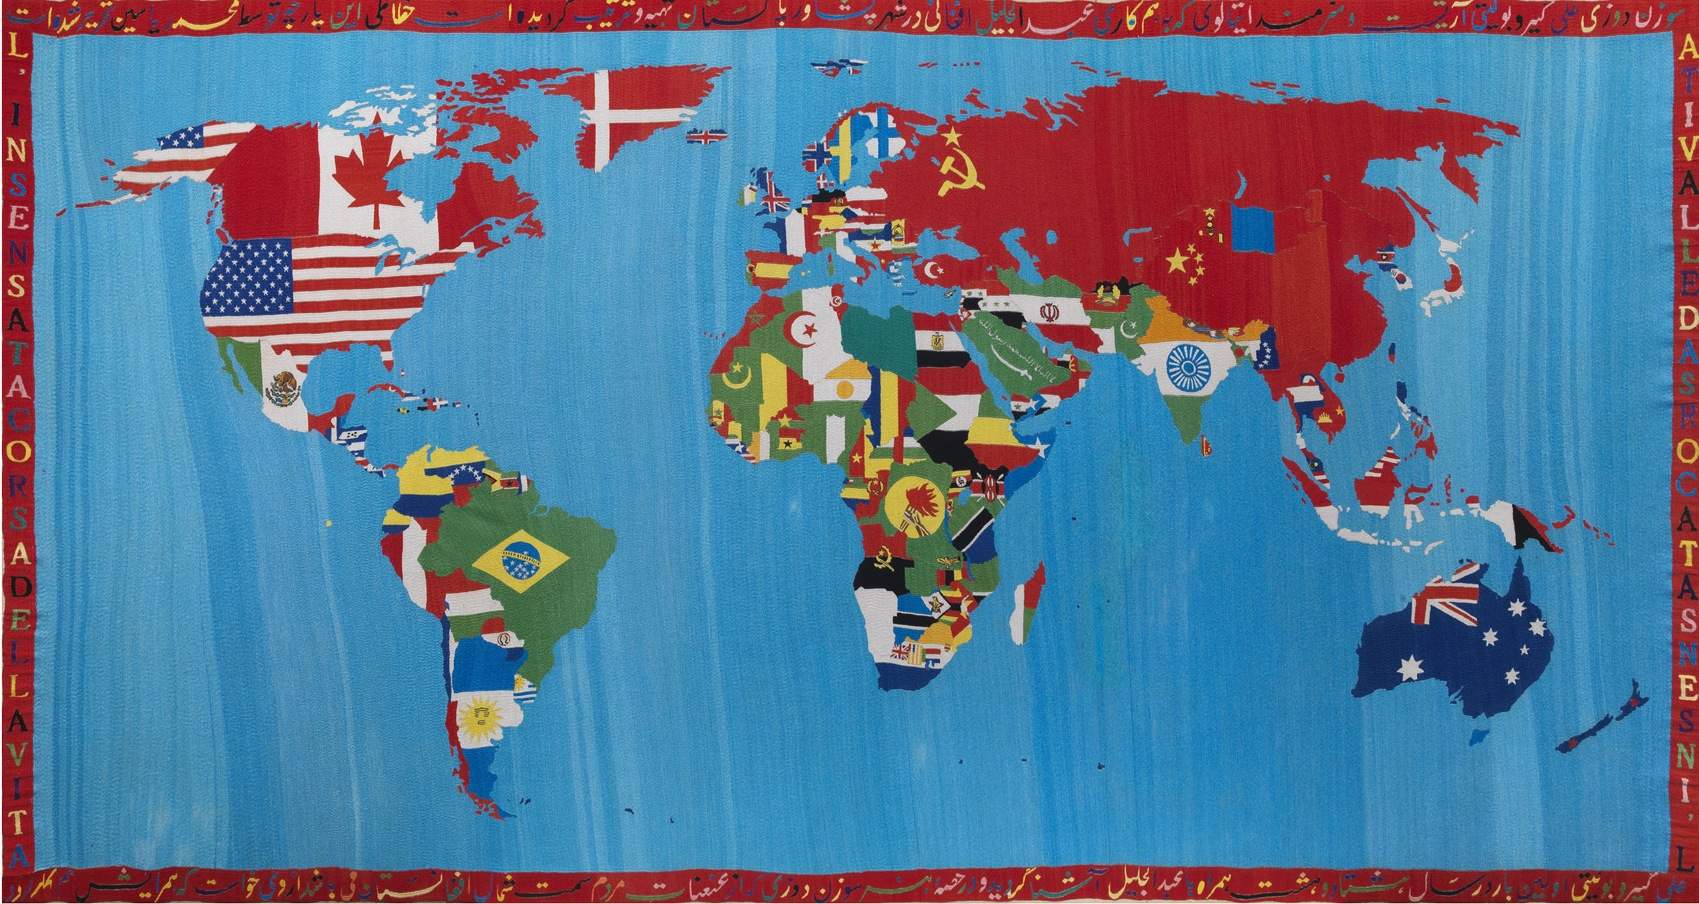 Alighiero Boetti, life, style and works of the exponent of Arte Povera